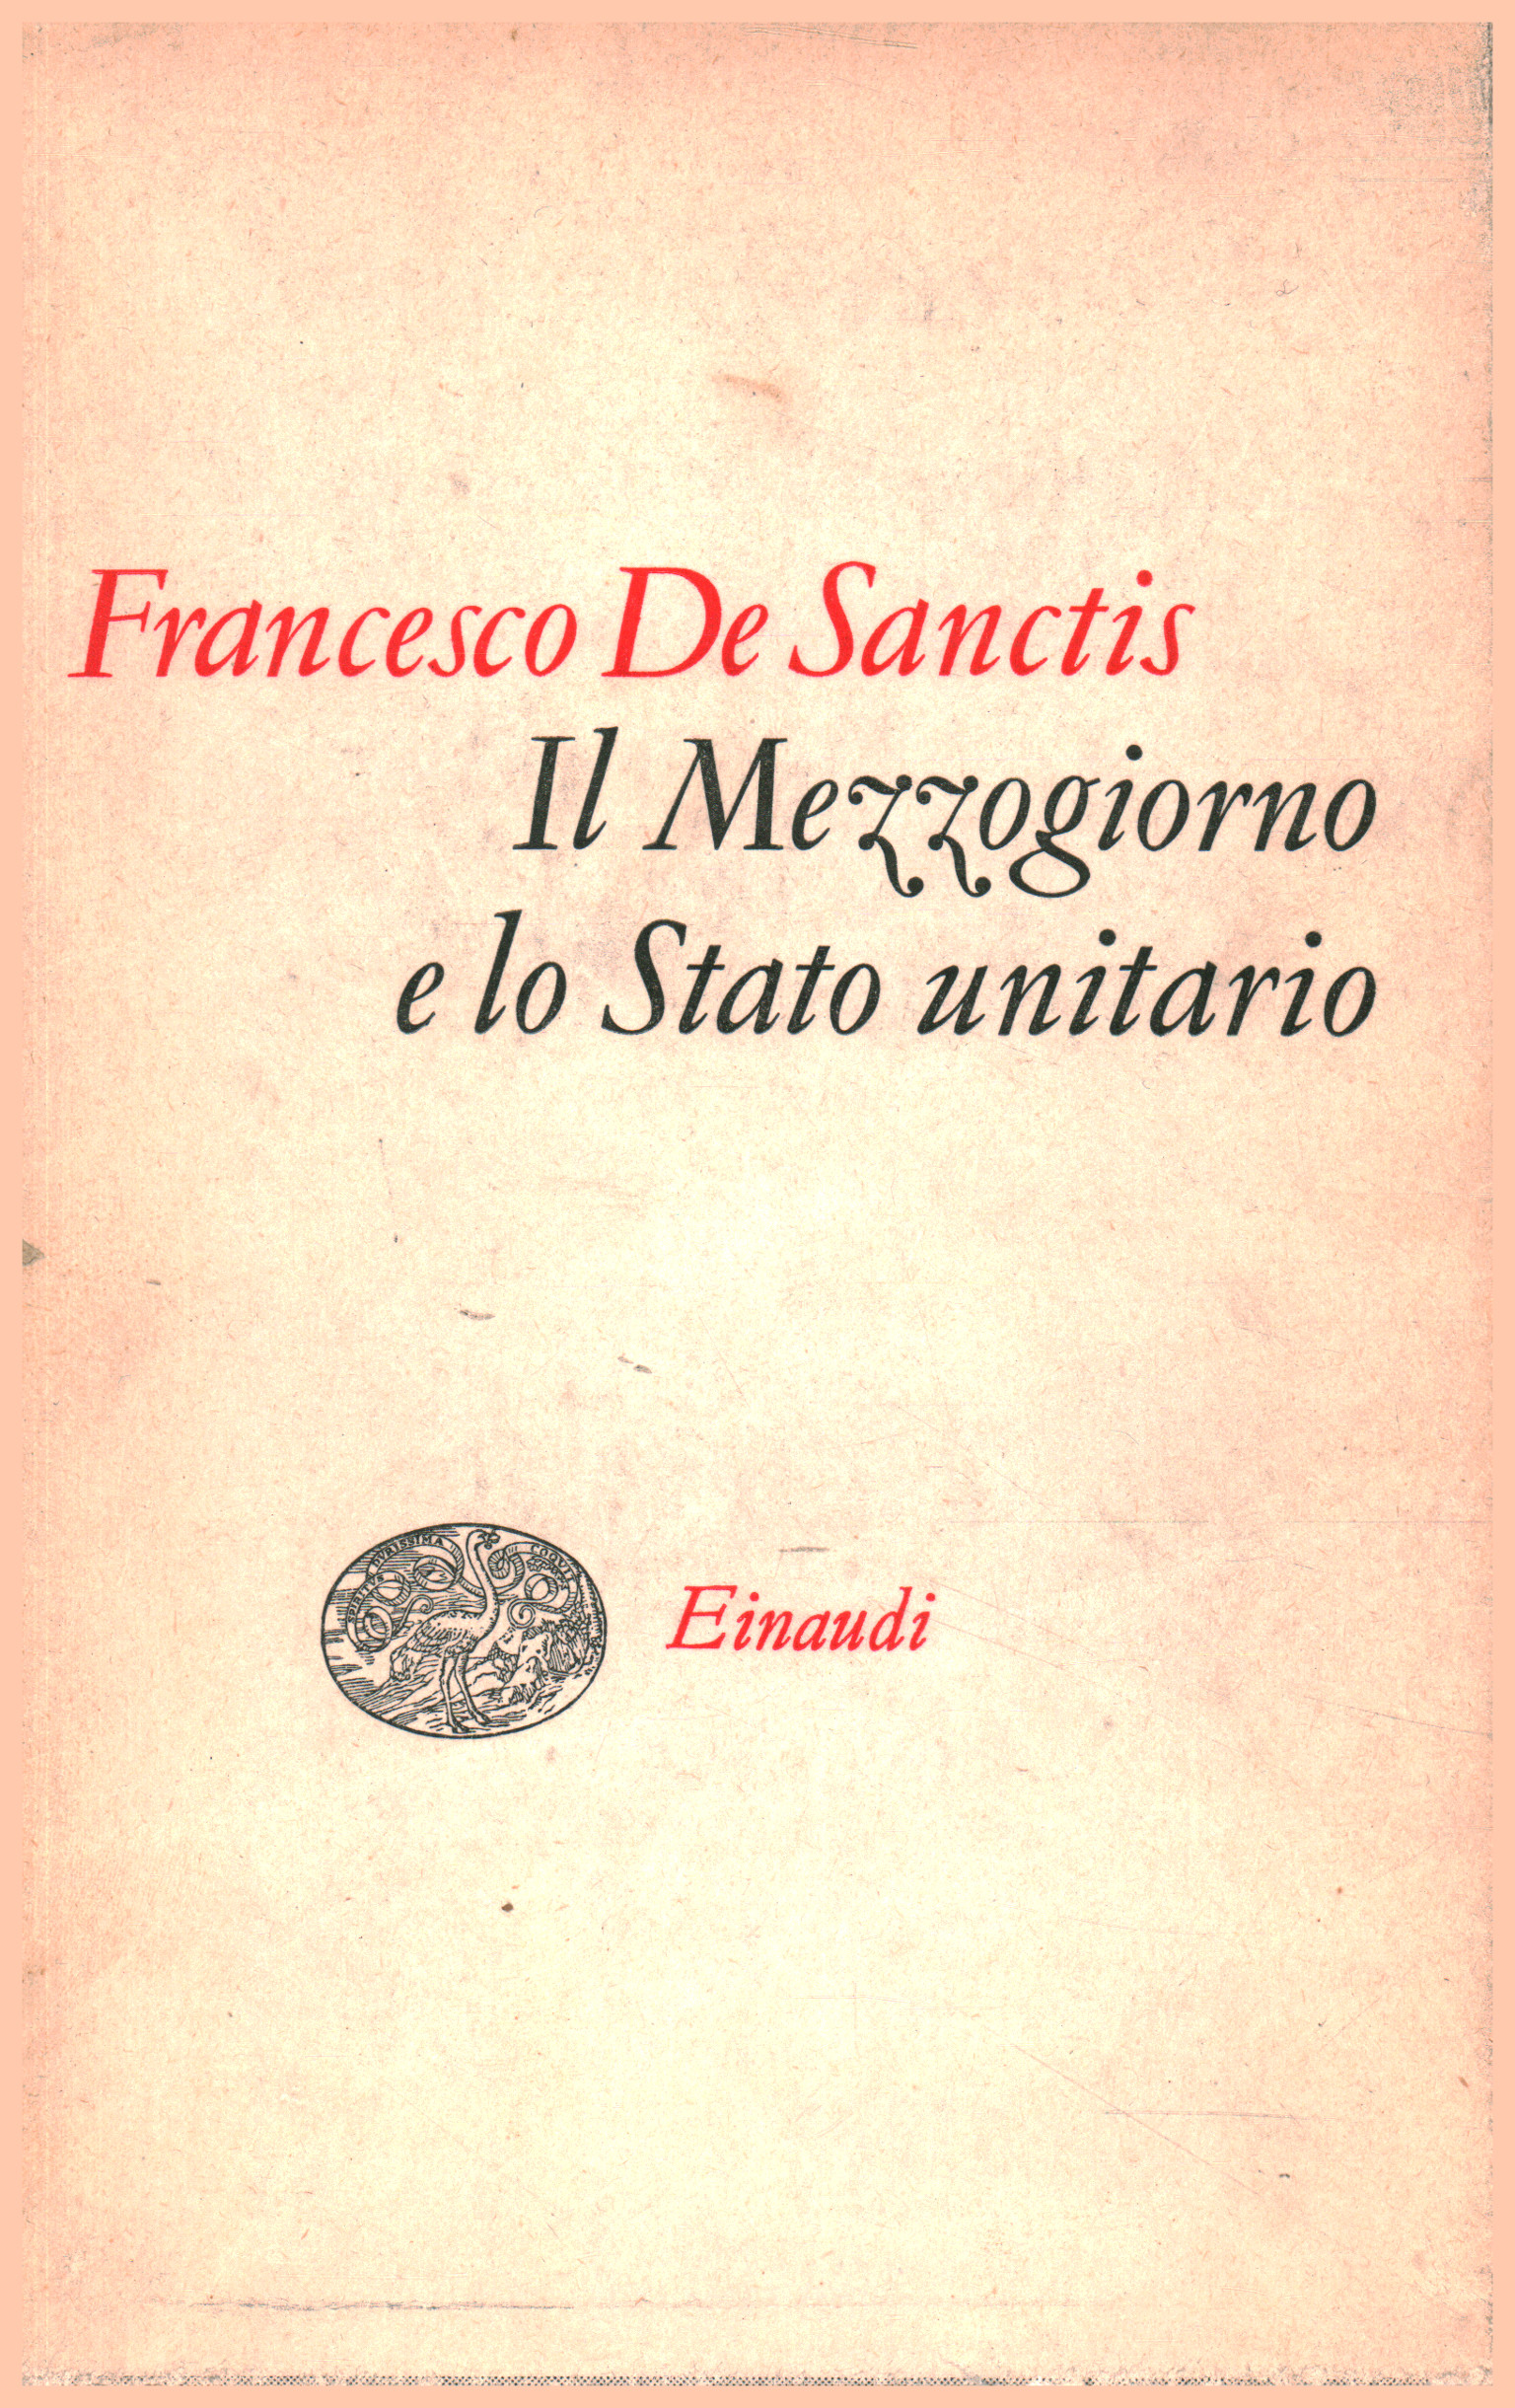 The South and the Unified State, Francesco De Sanctis